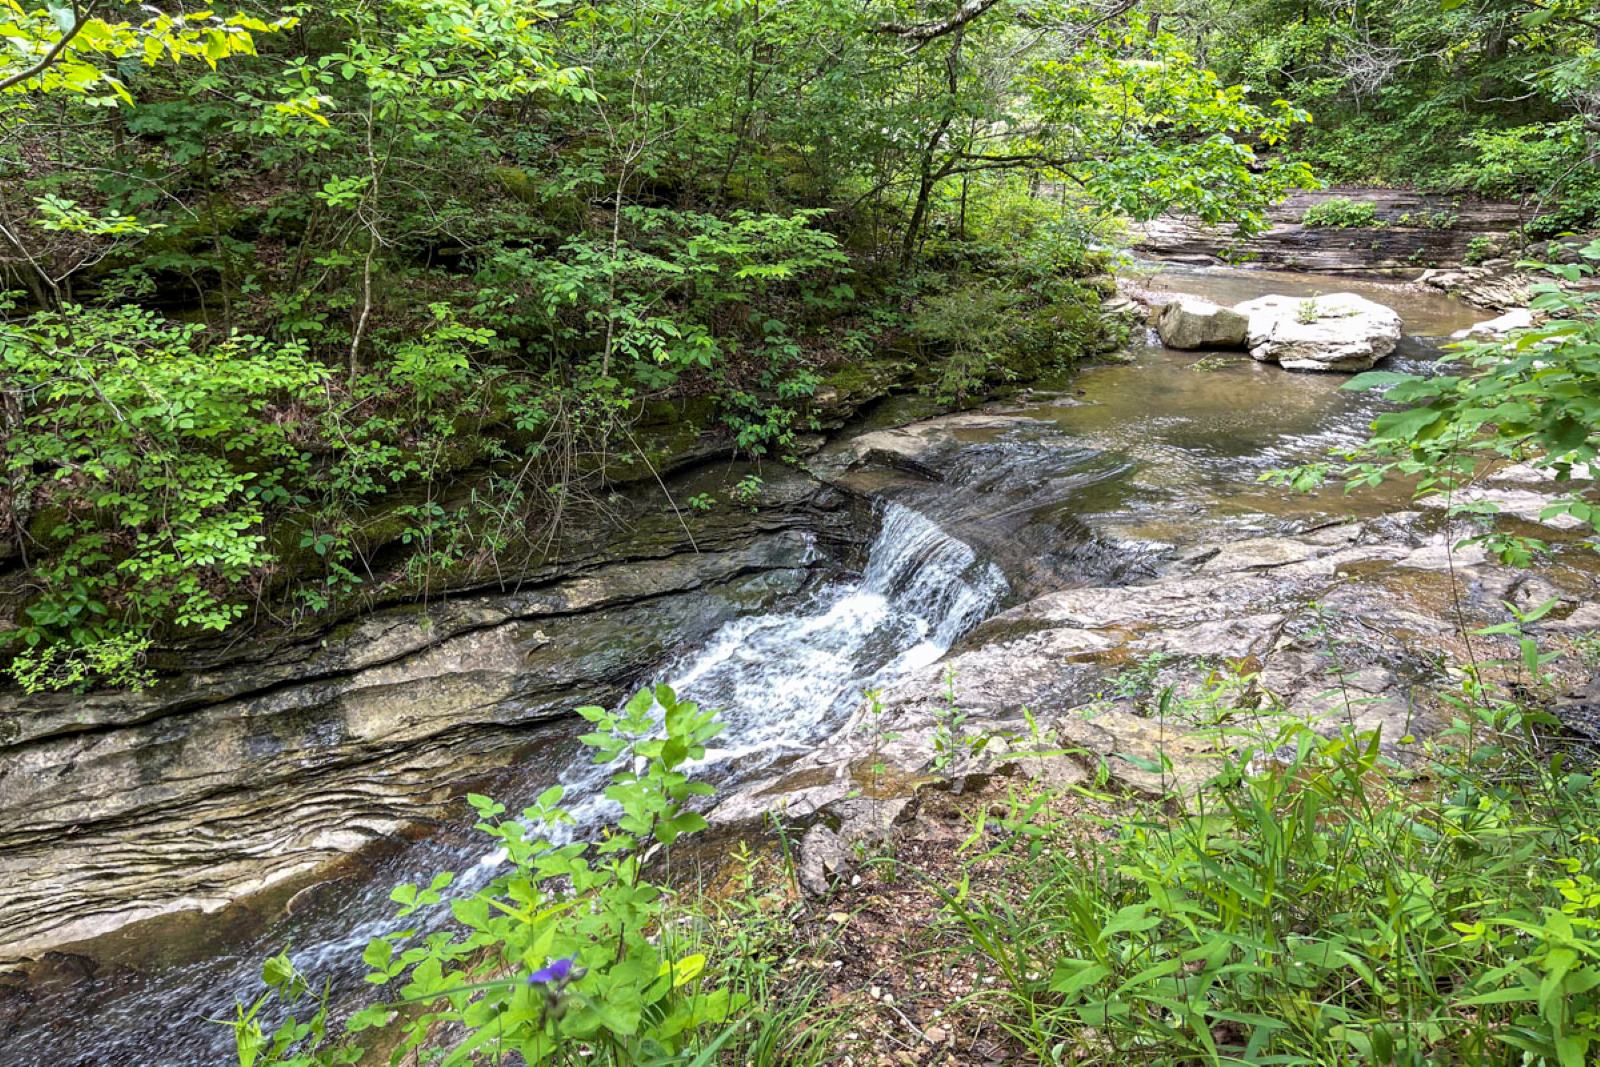 This small unnamed waterfall isn’t far from the start of a trail to see Paige and Broadwater Hollow Falls. (Photo by Sony Hocklander)